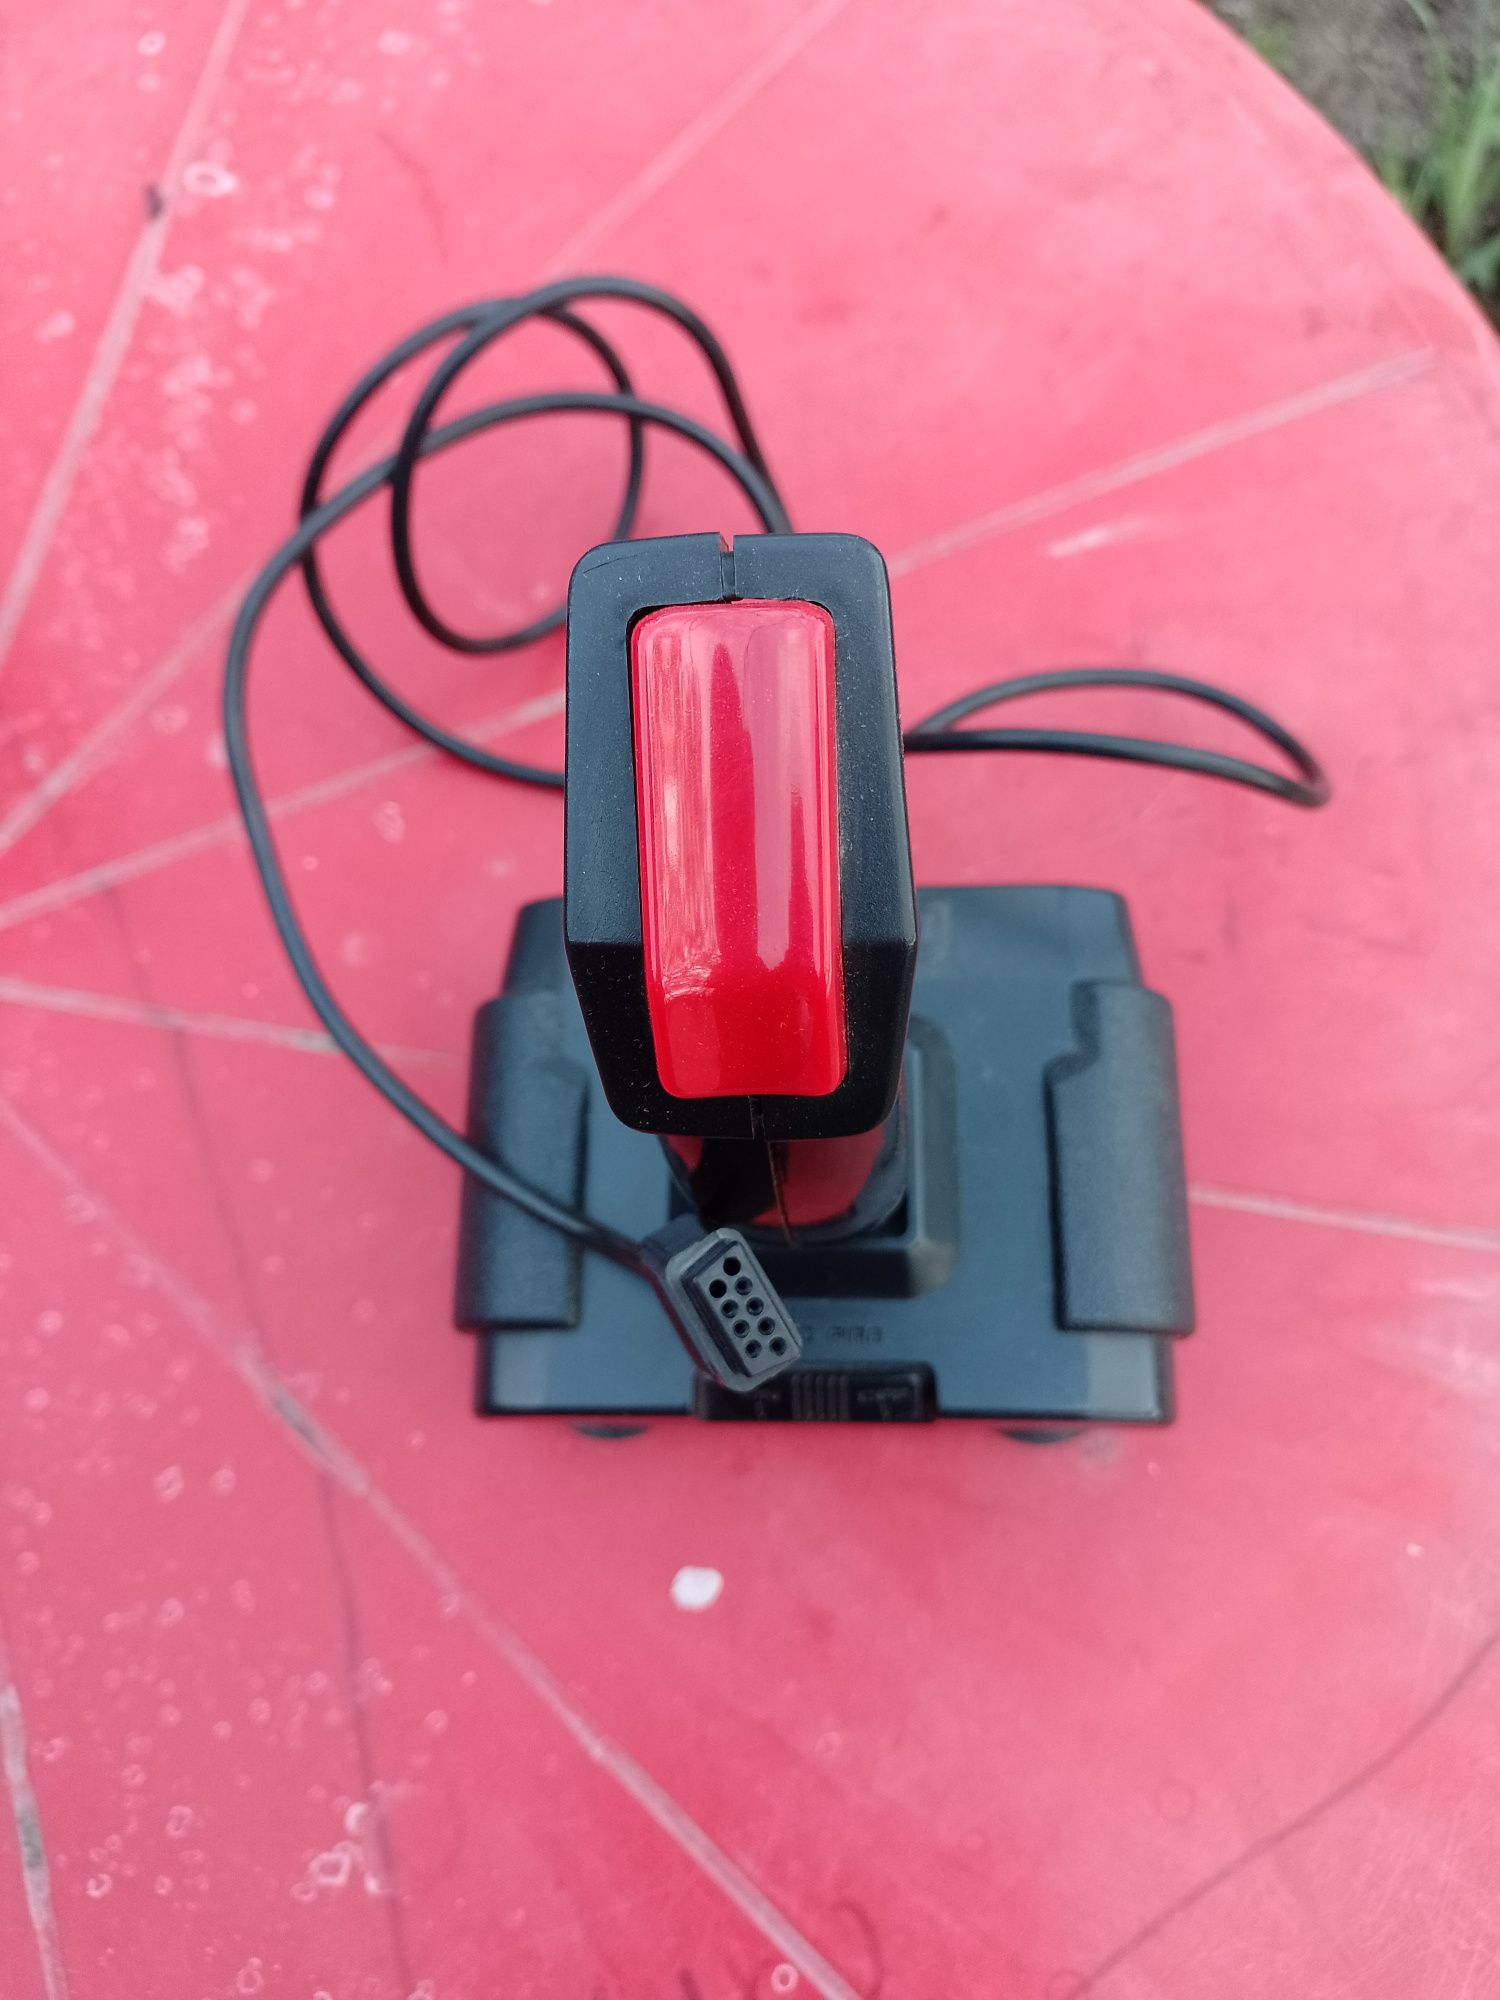 SJS2 Black Joystick Controller Modded to work with ATARI COMMODORE AMI